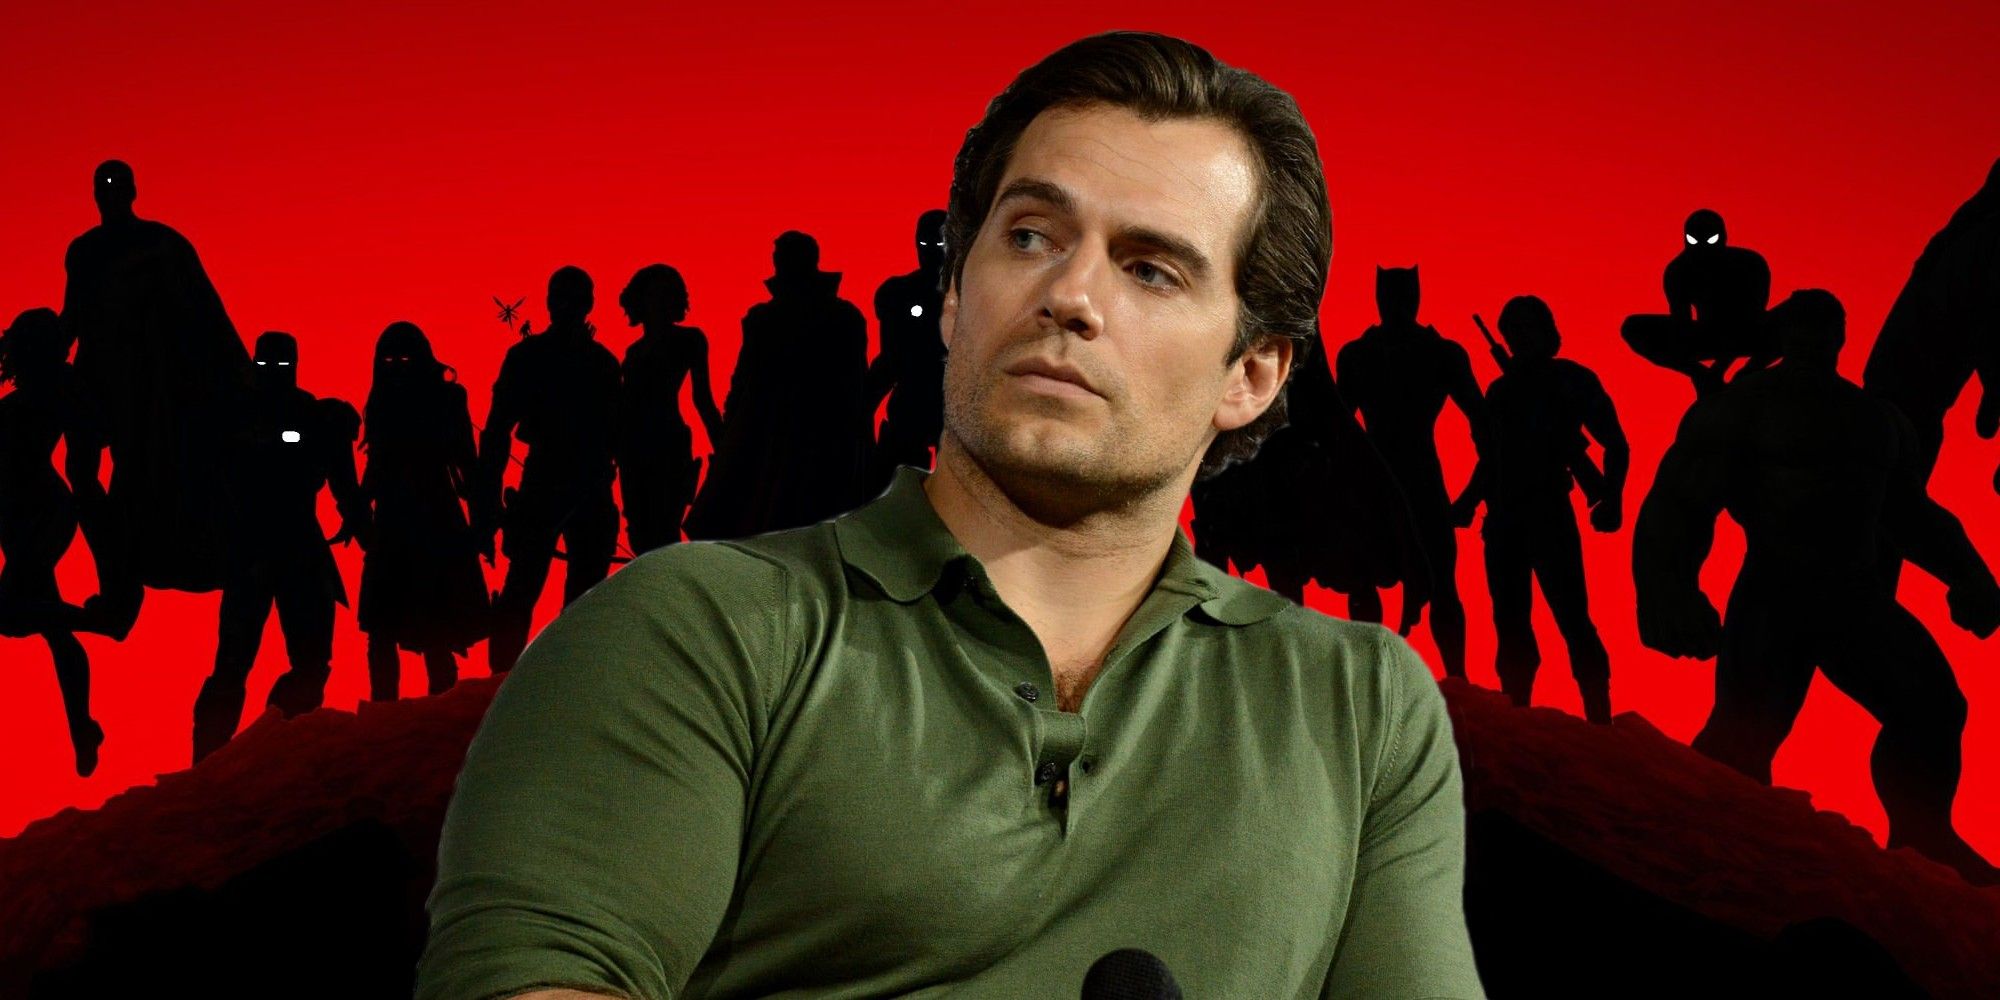 Fan Casting Henry Cavill as Scott Summers in My Ideal Casting Choices -  Marvel Universe on myCast